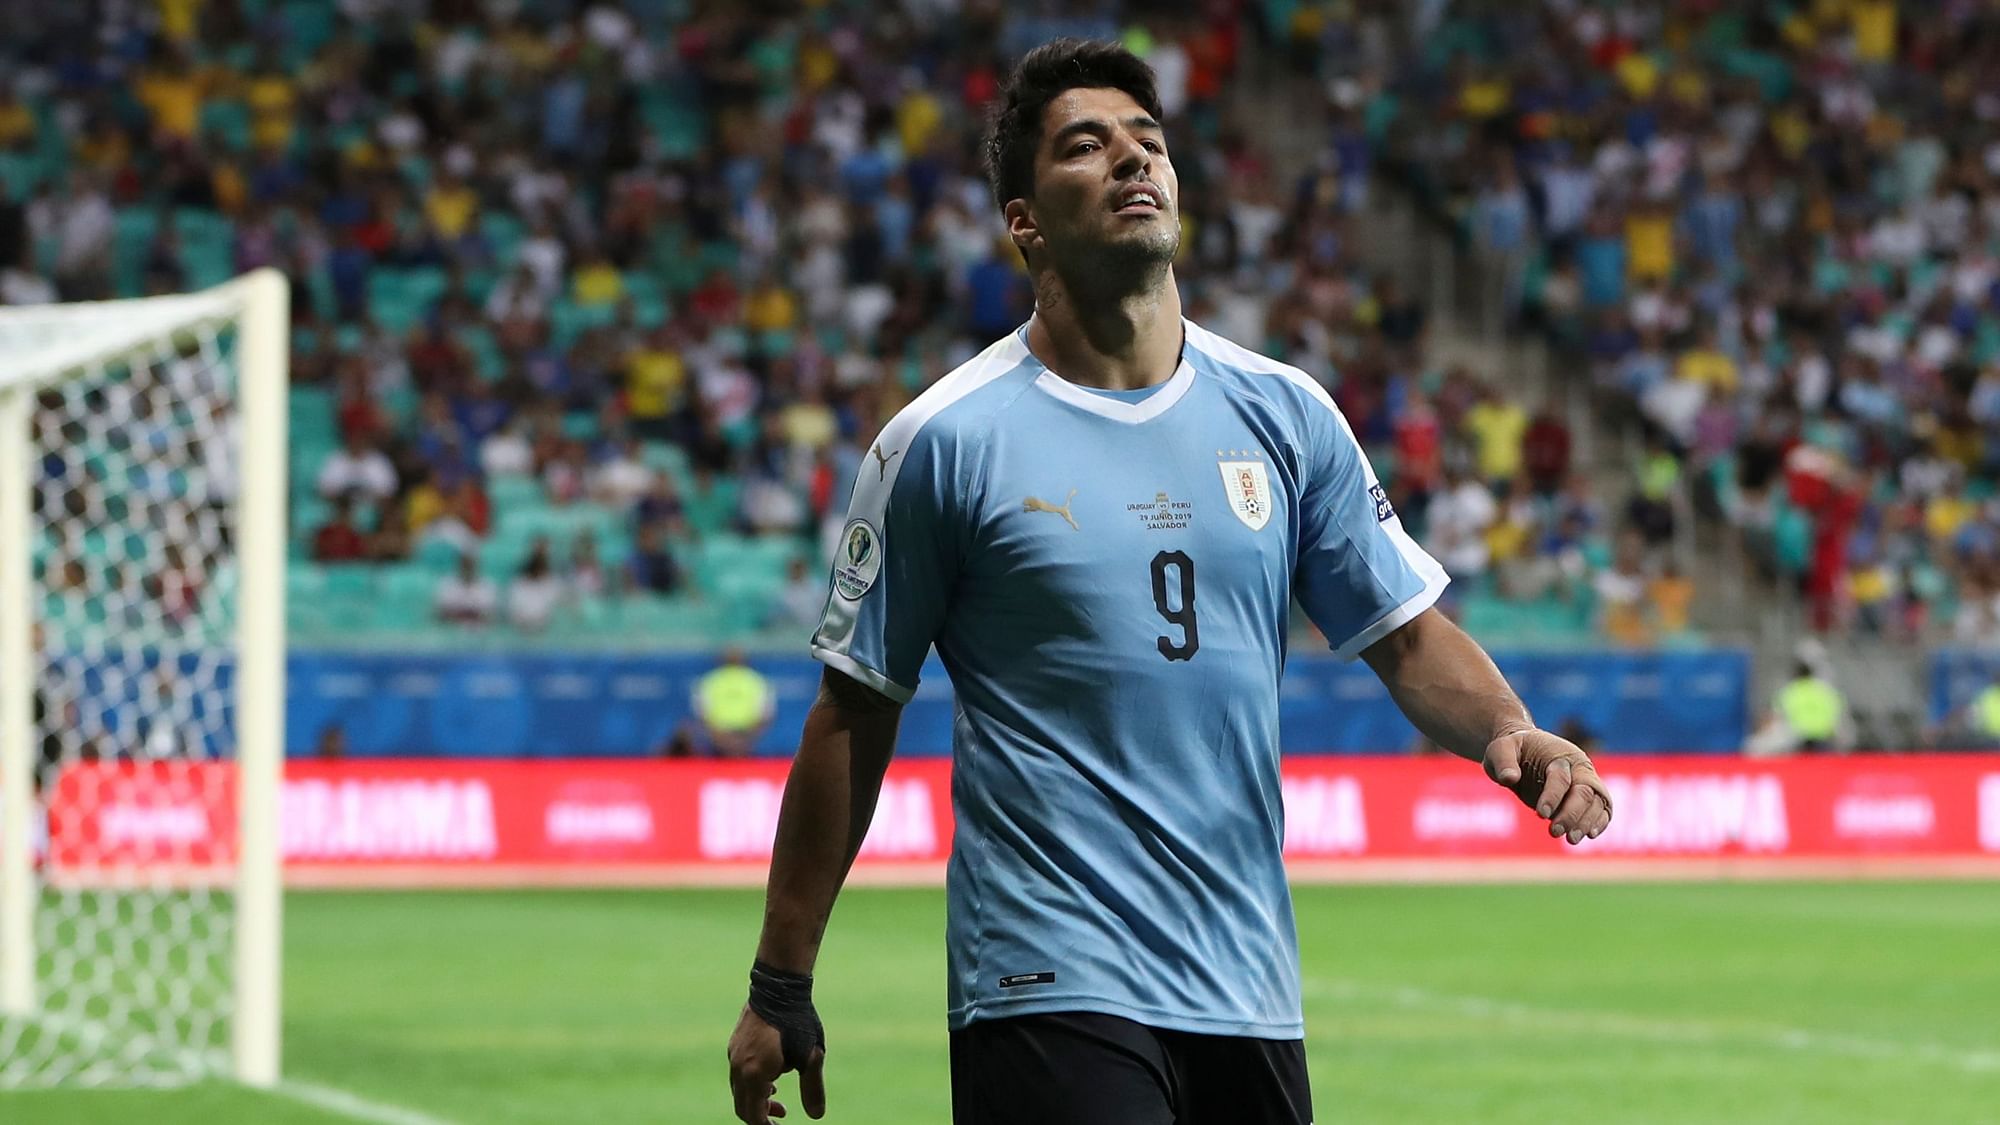 Suárez was the only player to miss from the spot and left the field in tears.